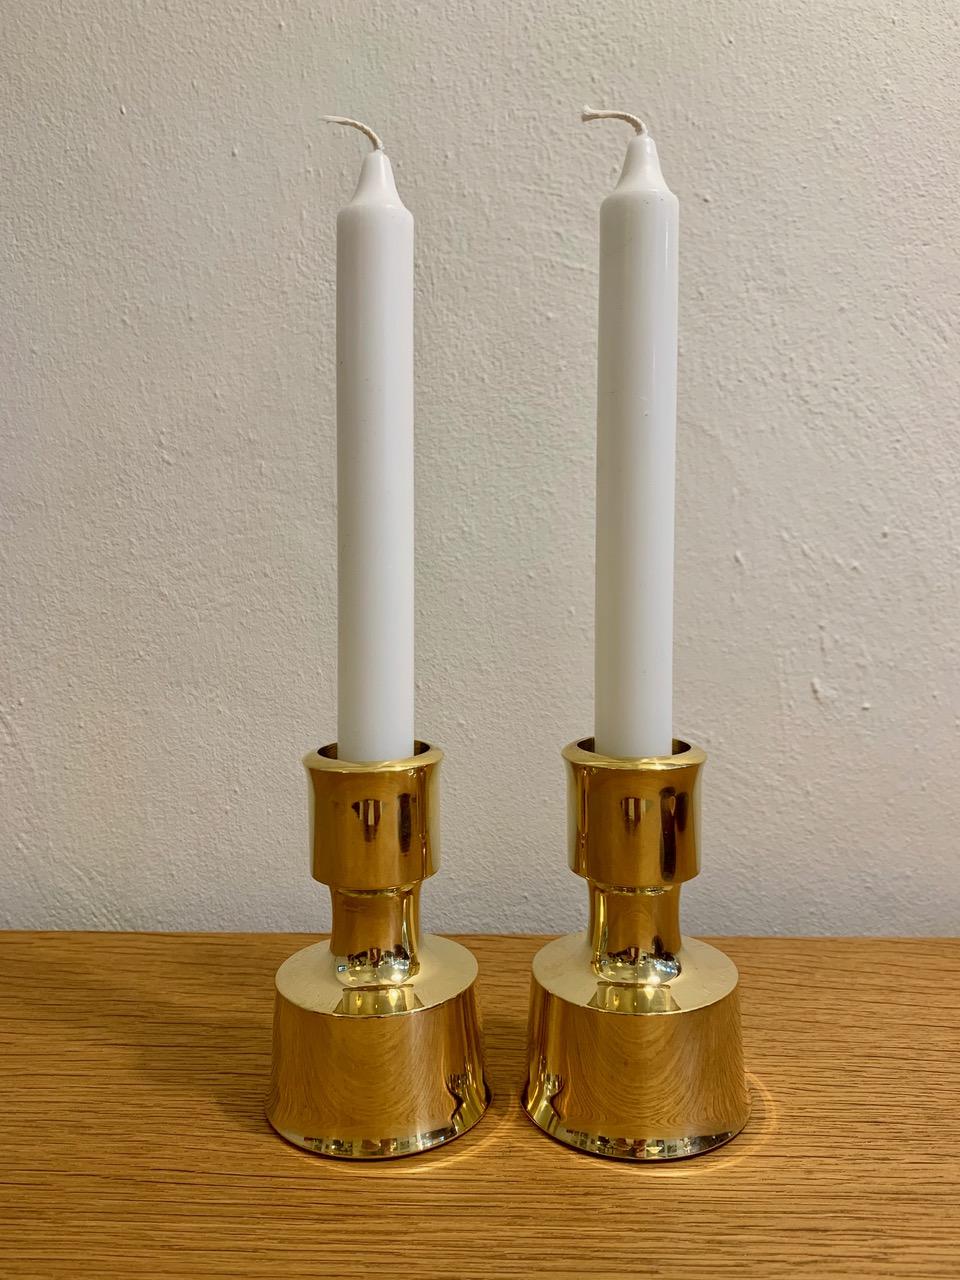 Pair of Solid Brass Candle Holders by Jens H. Quistgaard for Dansk Designs 1963 For Sale 3